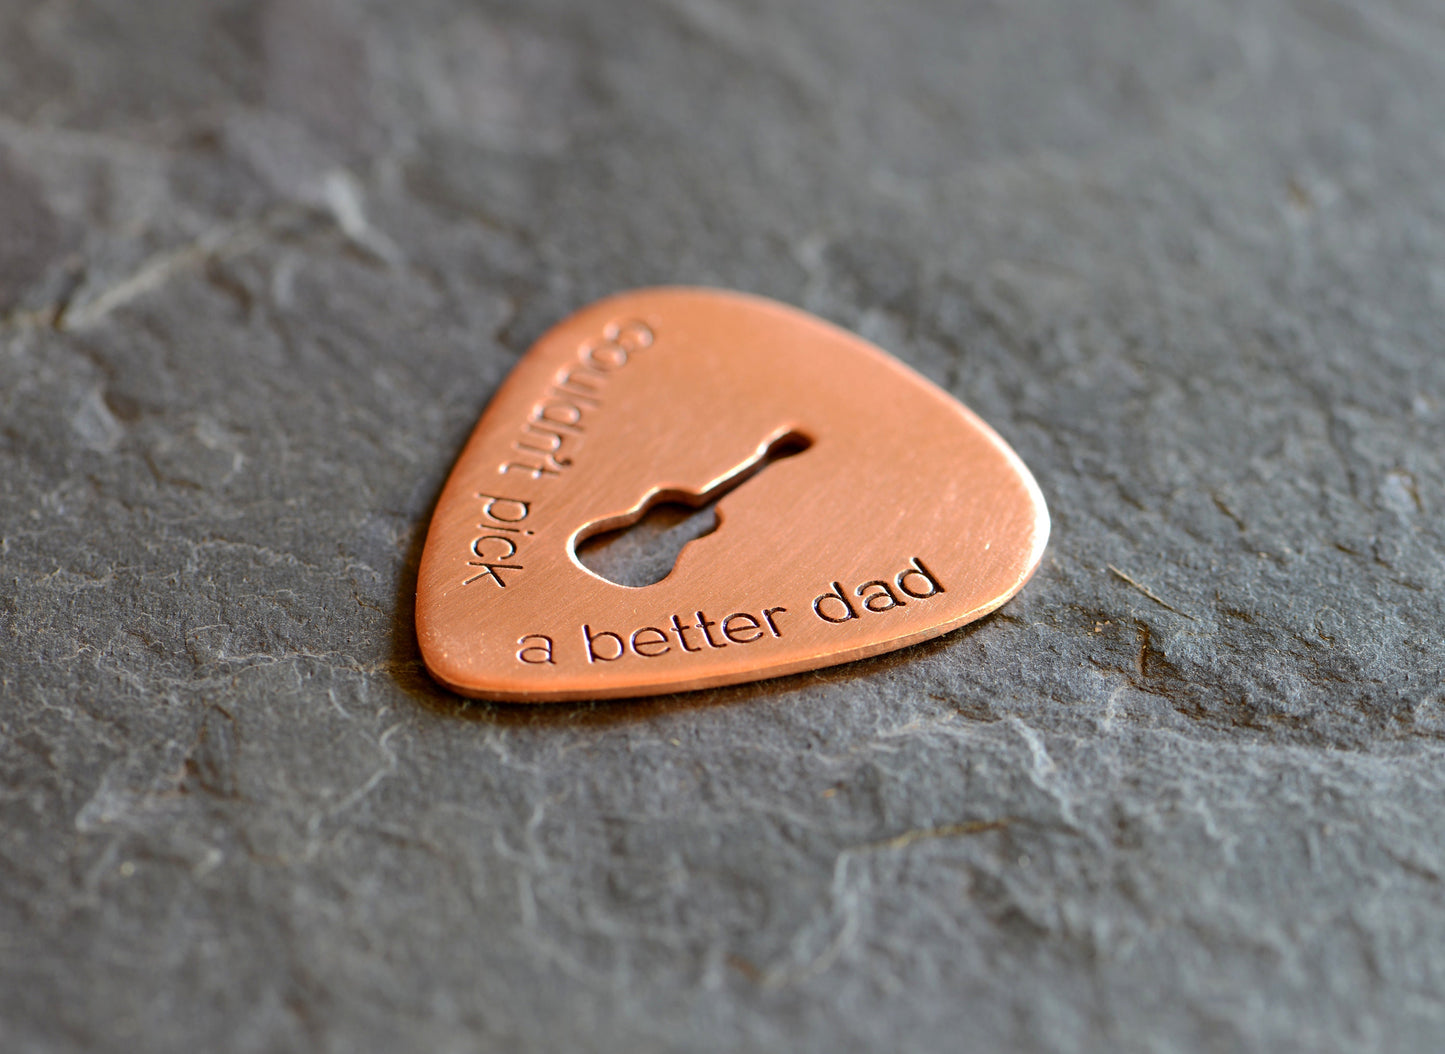 Guitar pick with Couldn't pick a better dad and a cutout guitar in bronze